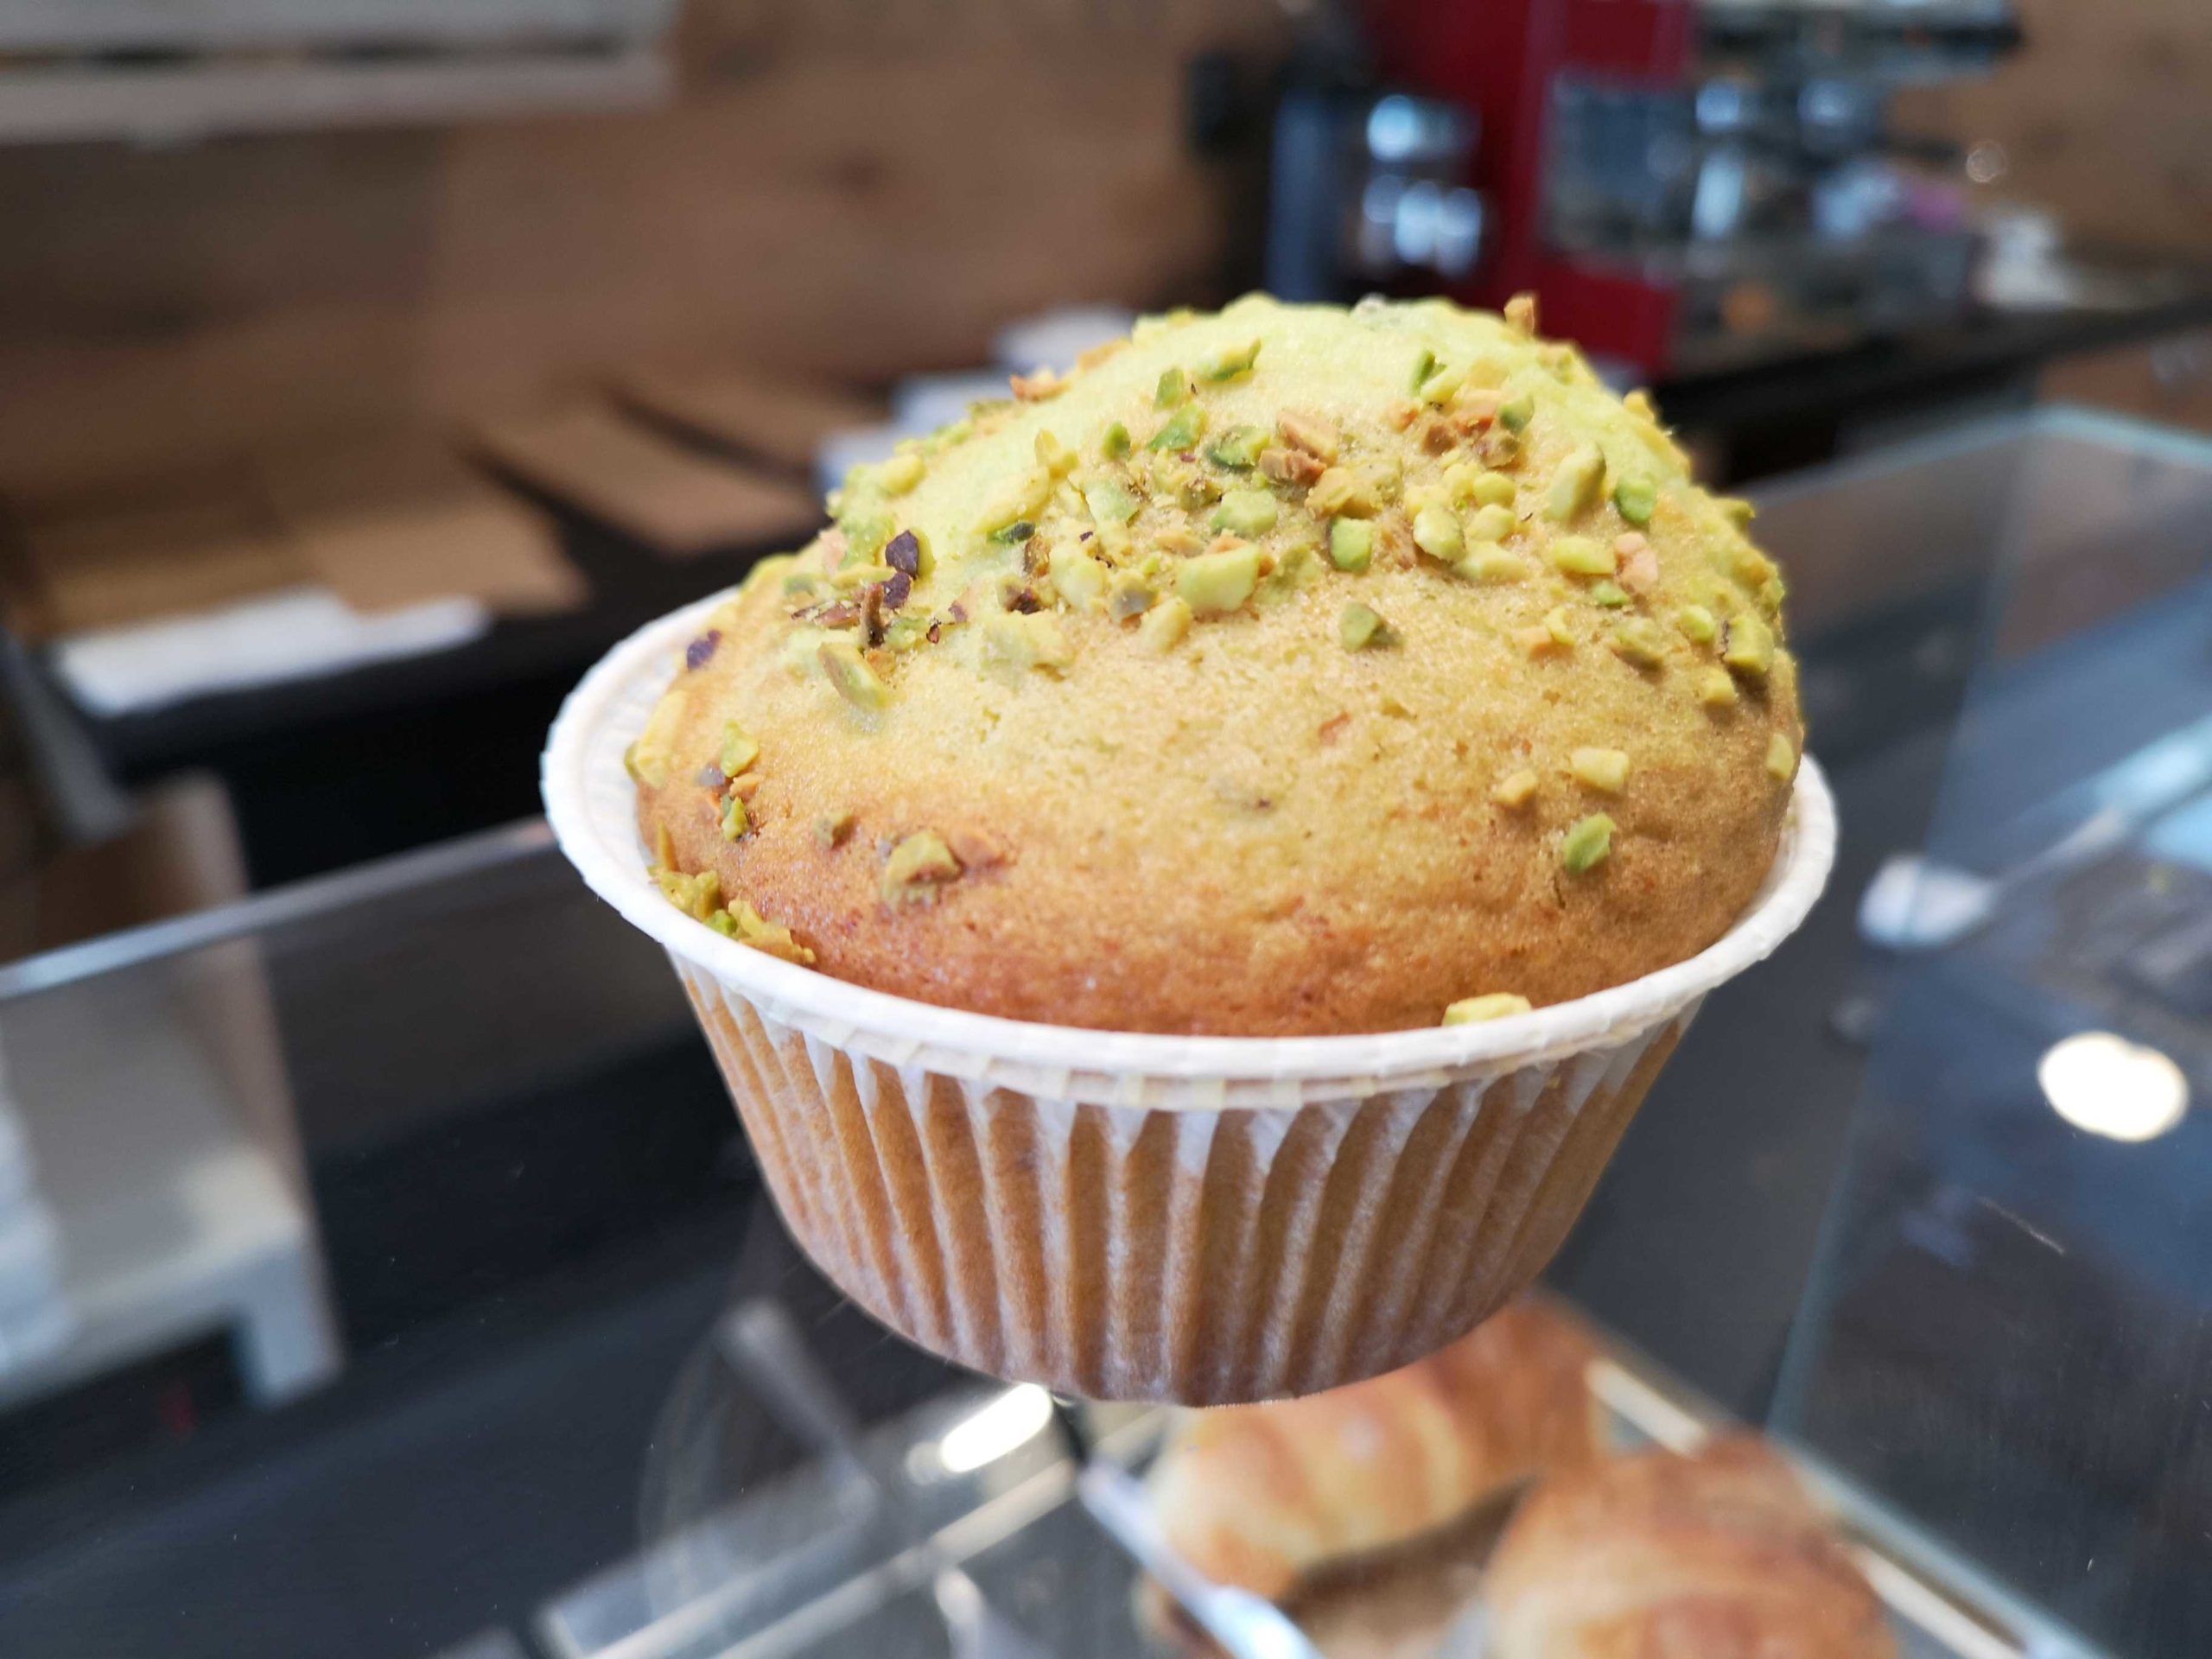 Pistachio muffin and arancini: order it today!